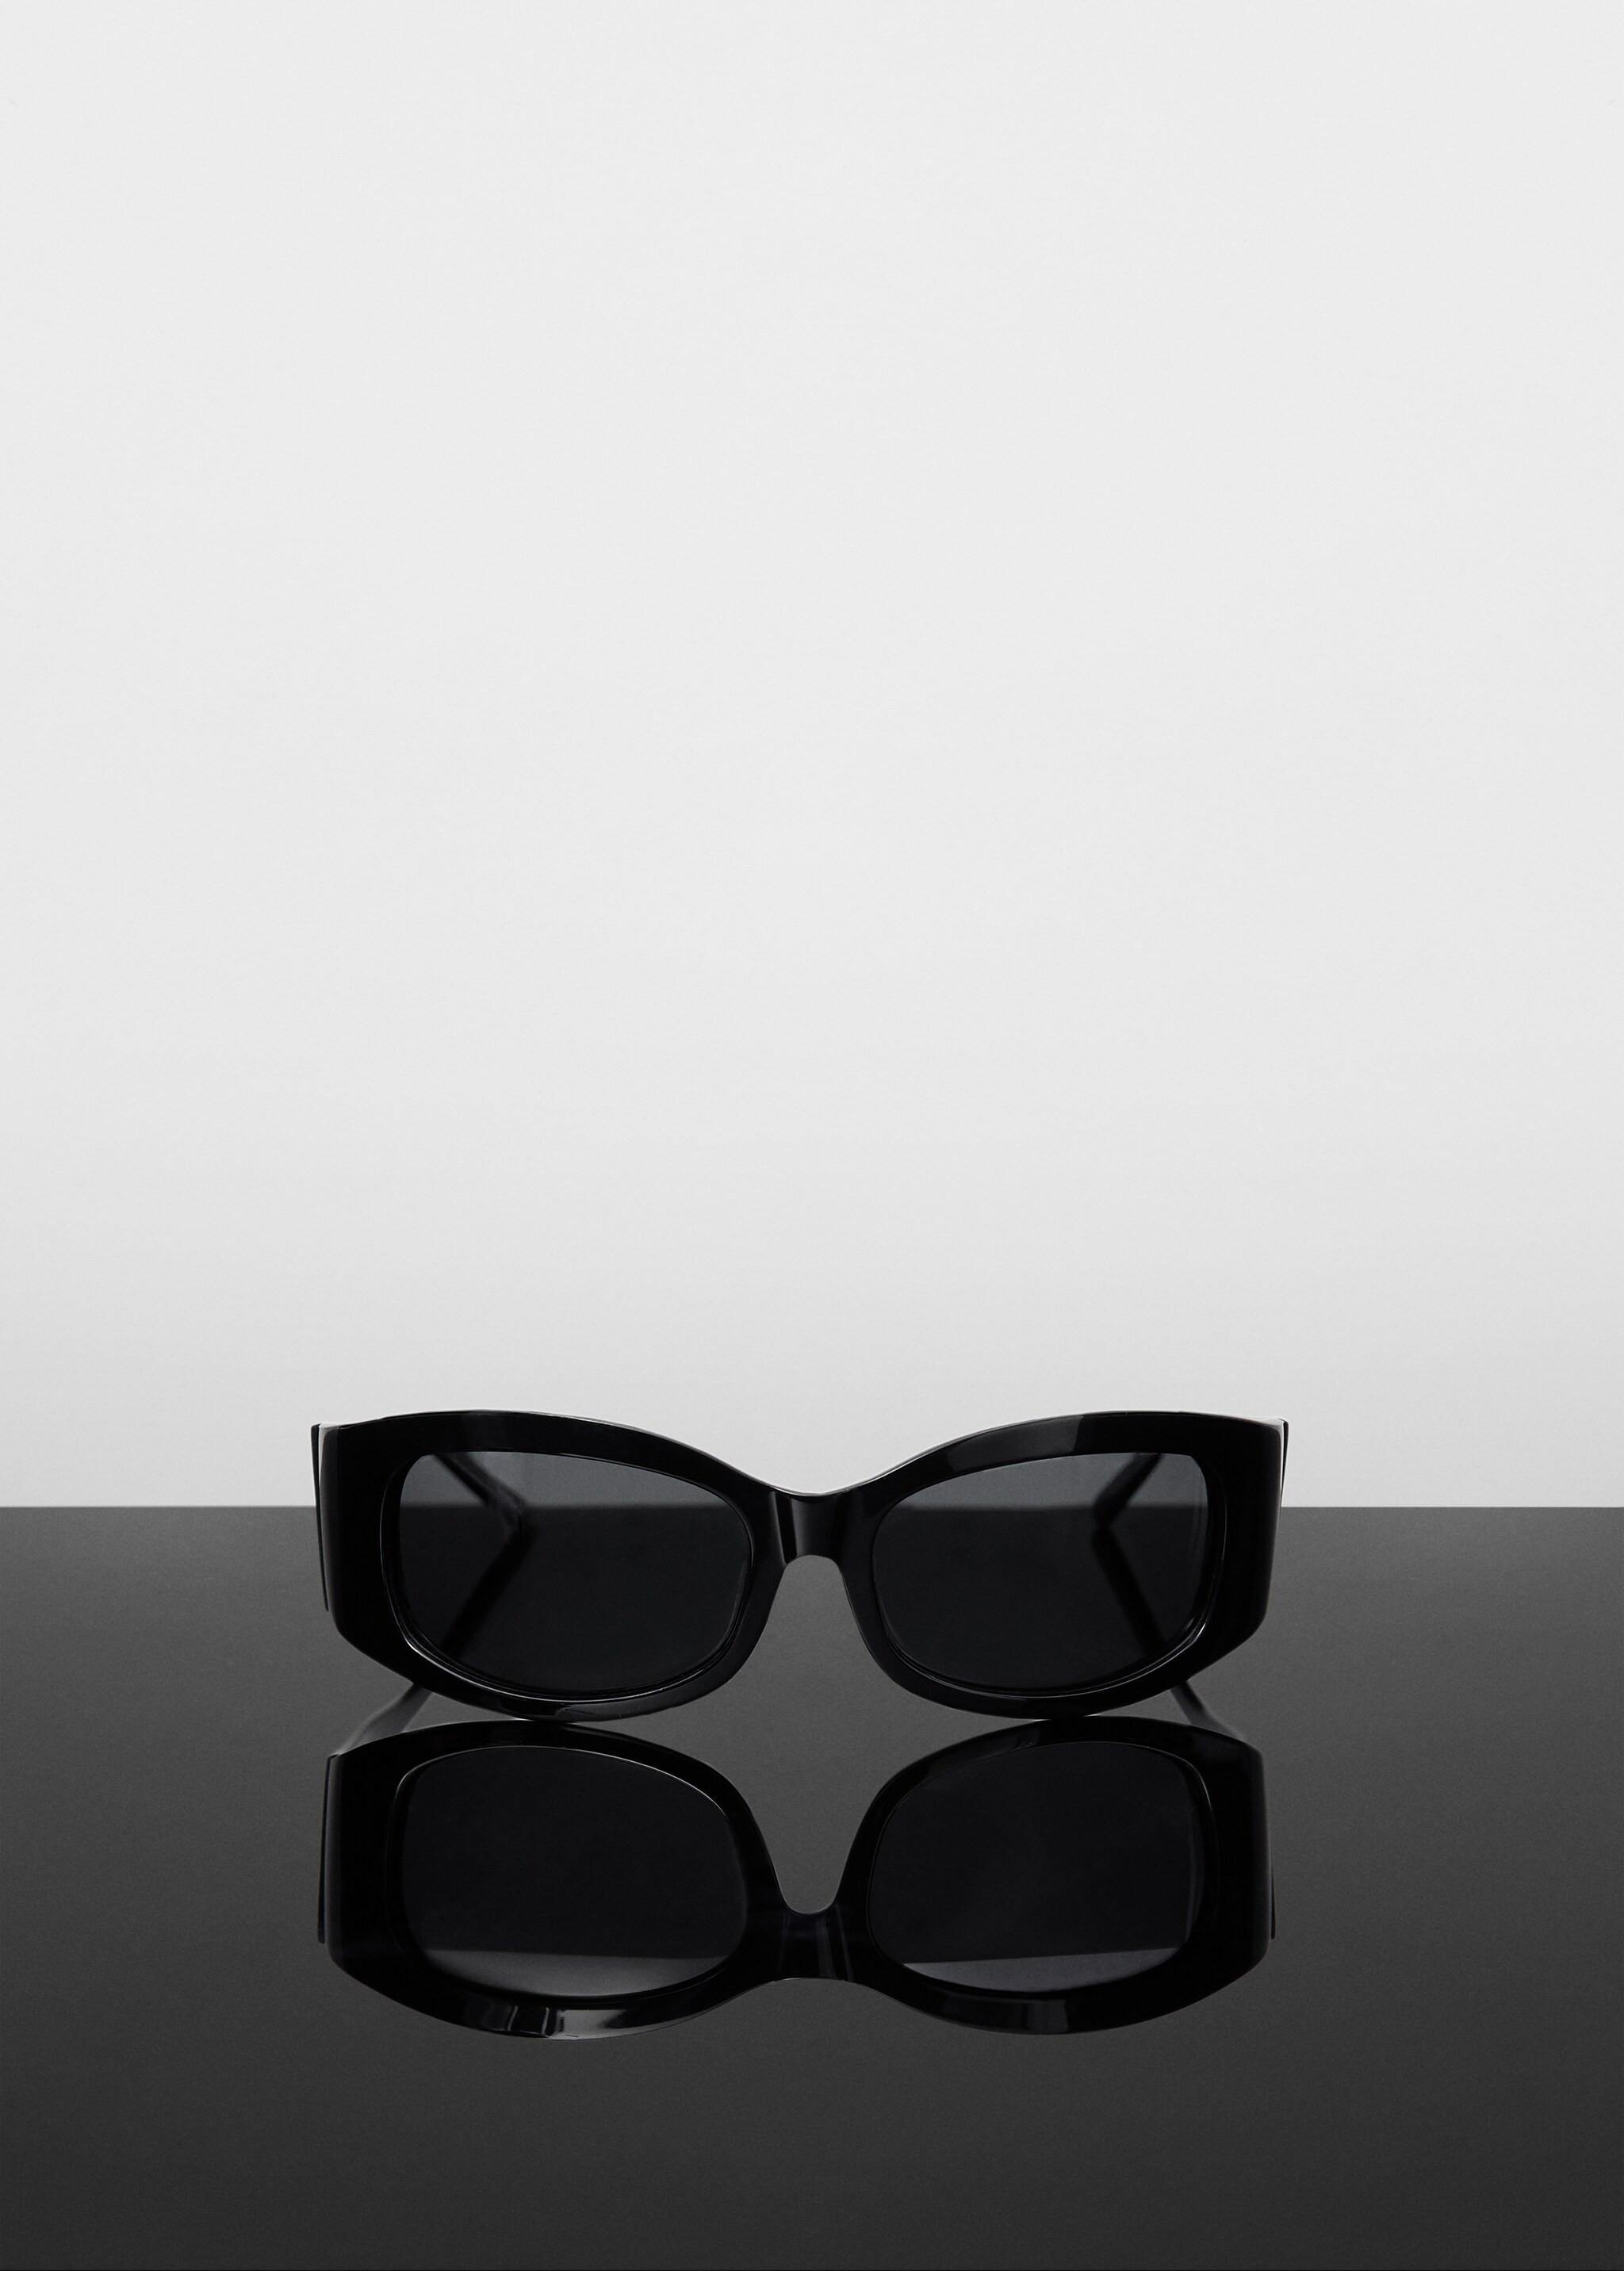 Oval frame sunglasses - Article without model